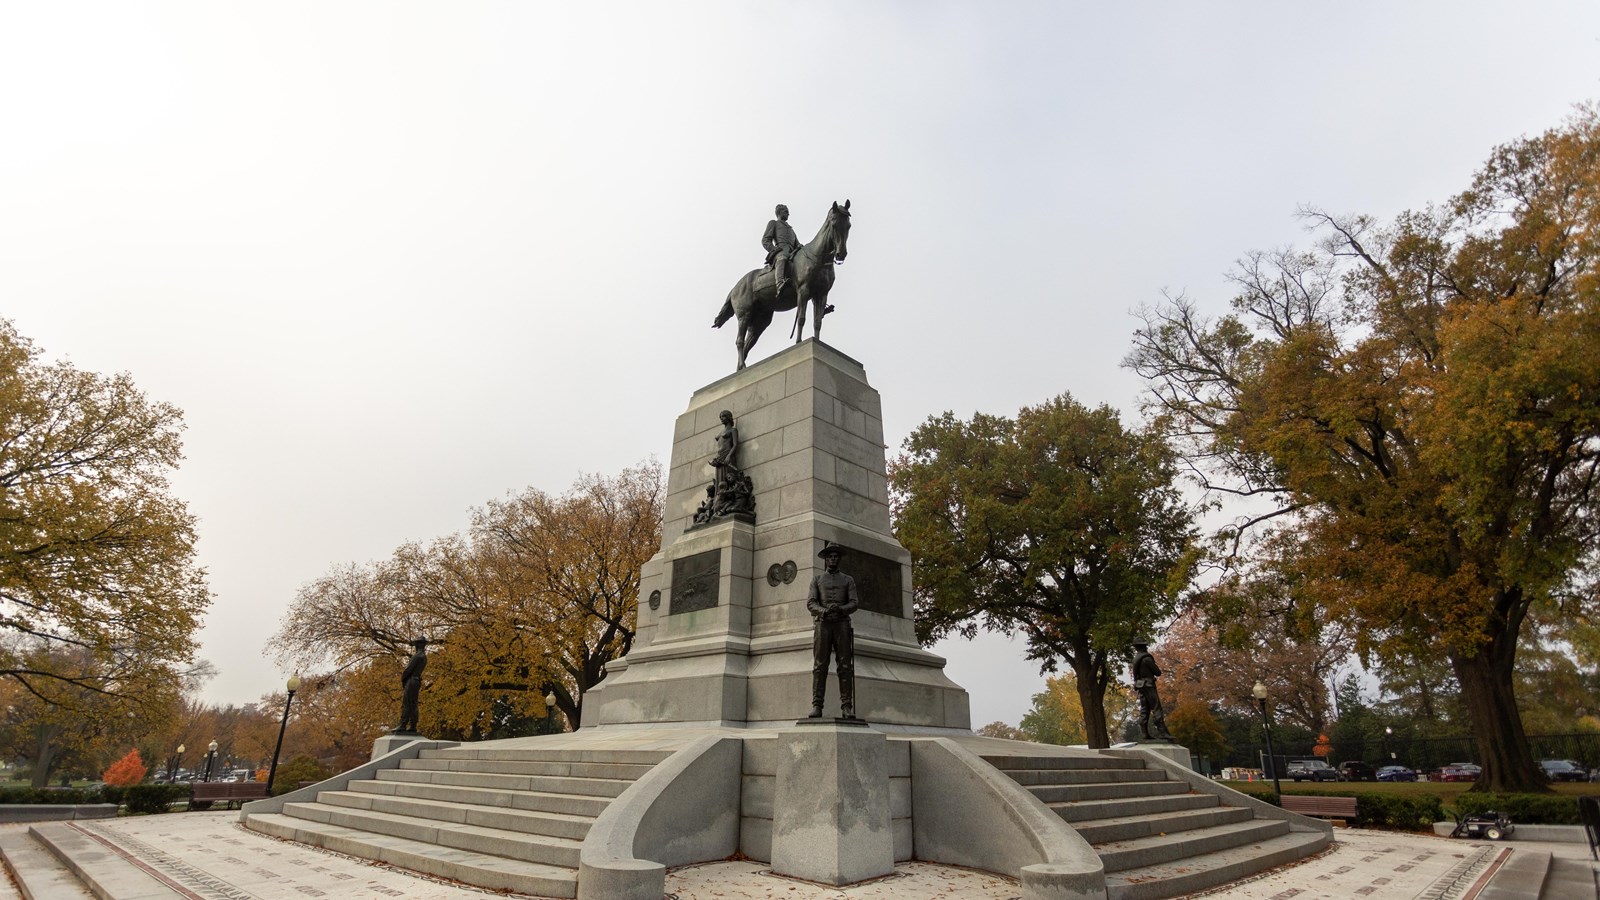 A statue of General William Tecumseh Sherman riding a horse on top of a large stone pedestal.